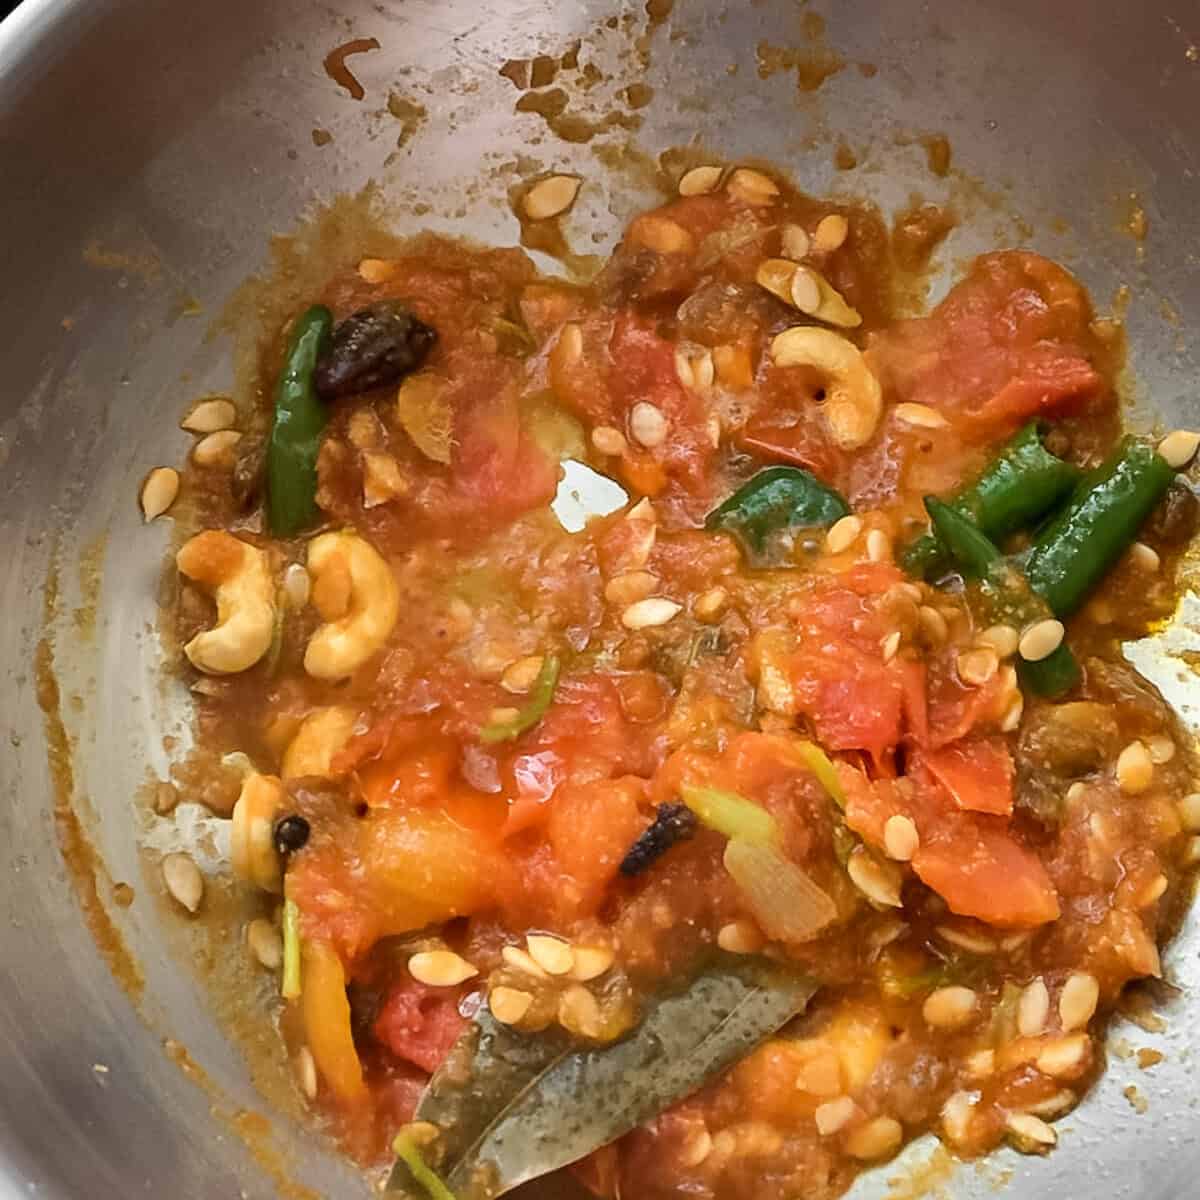 A mixture of tomatoes, melon seeds, cashew nuts, bay leaf, and whole spices cooking in a stainless steel wok to make a shahi sauce.